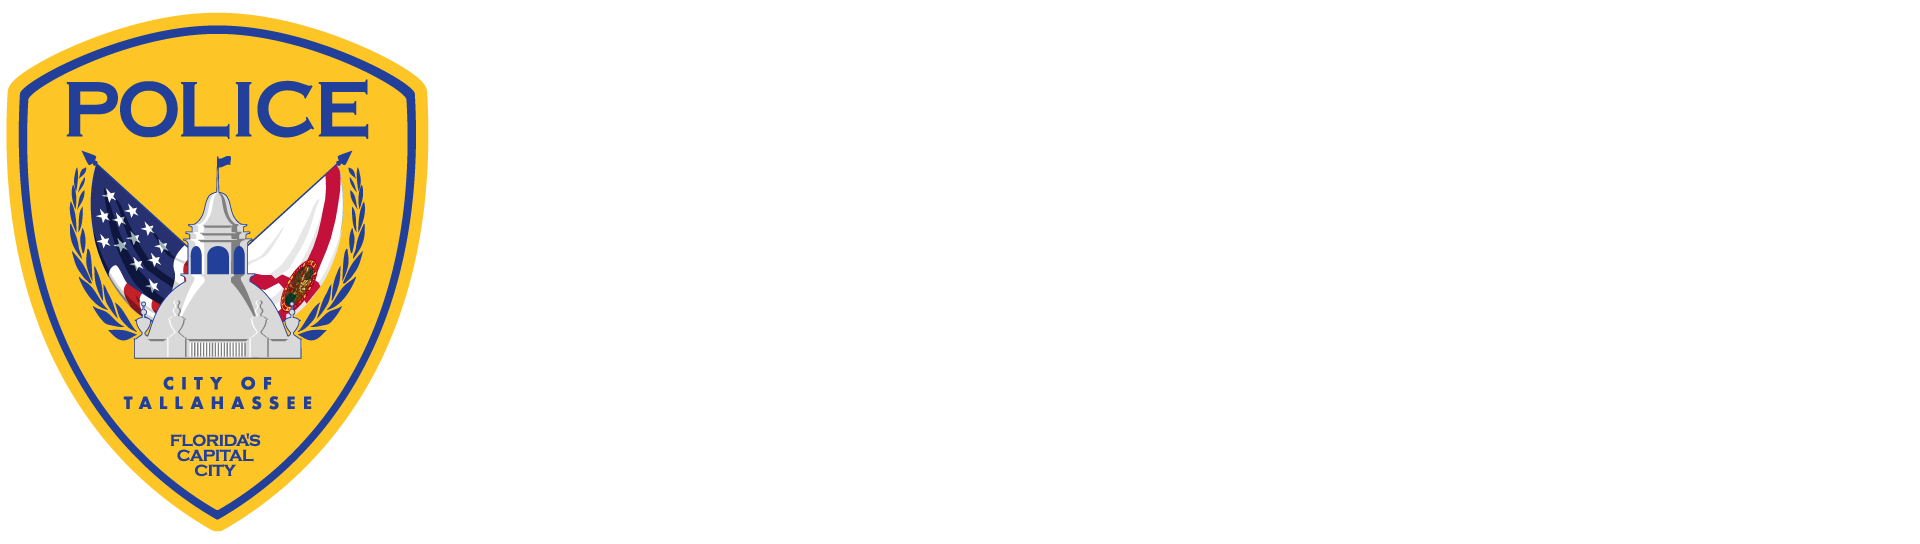 Tallahassee Police Department Logo